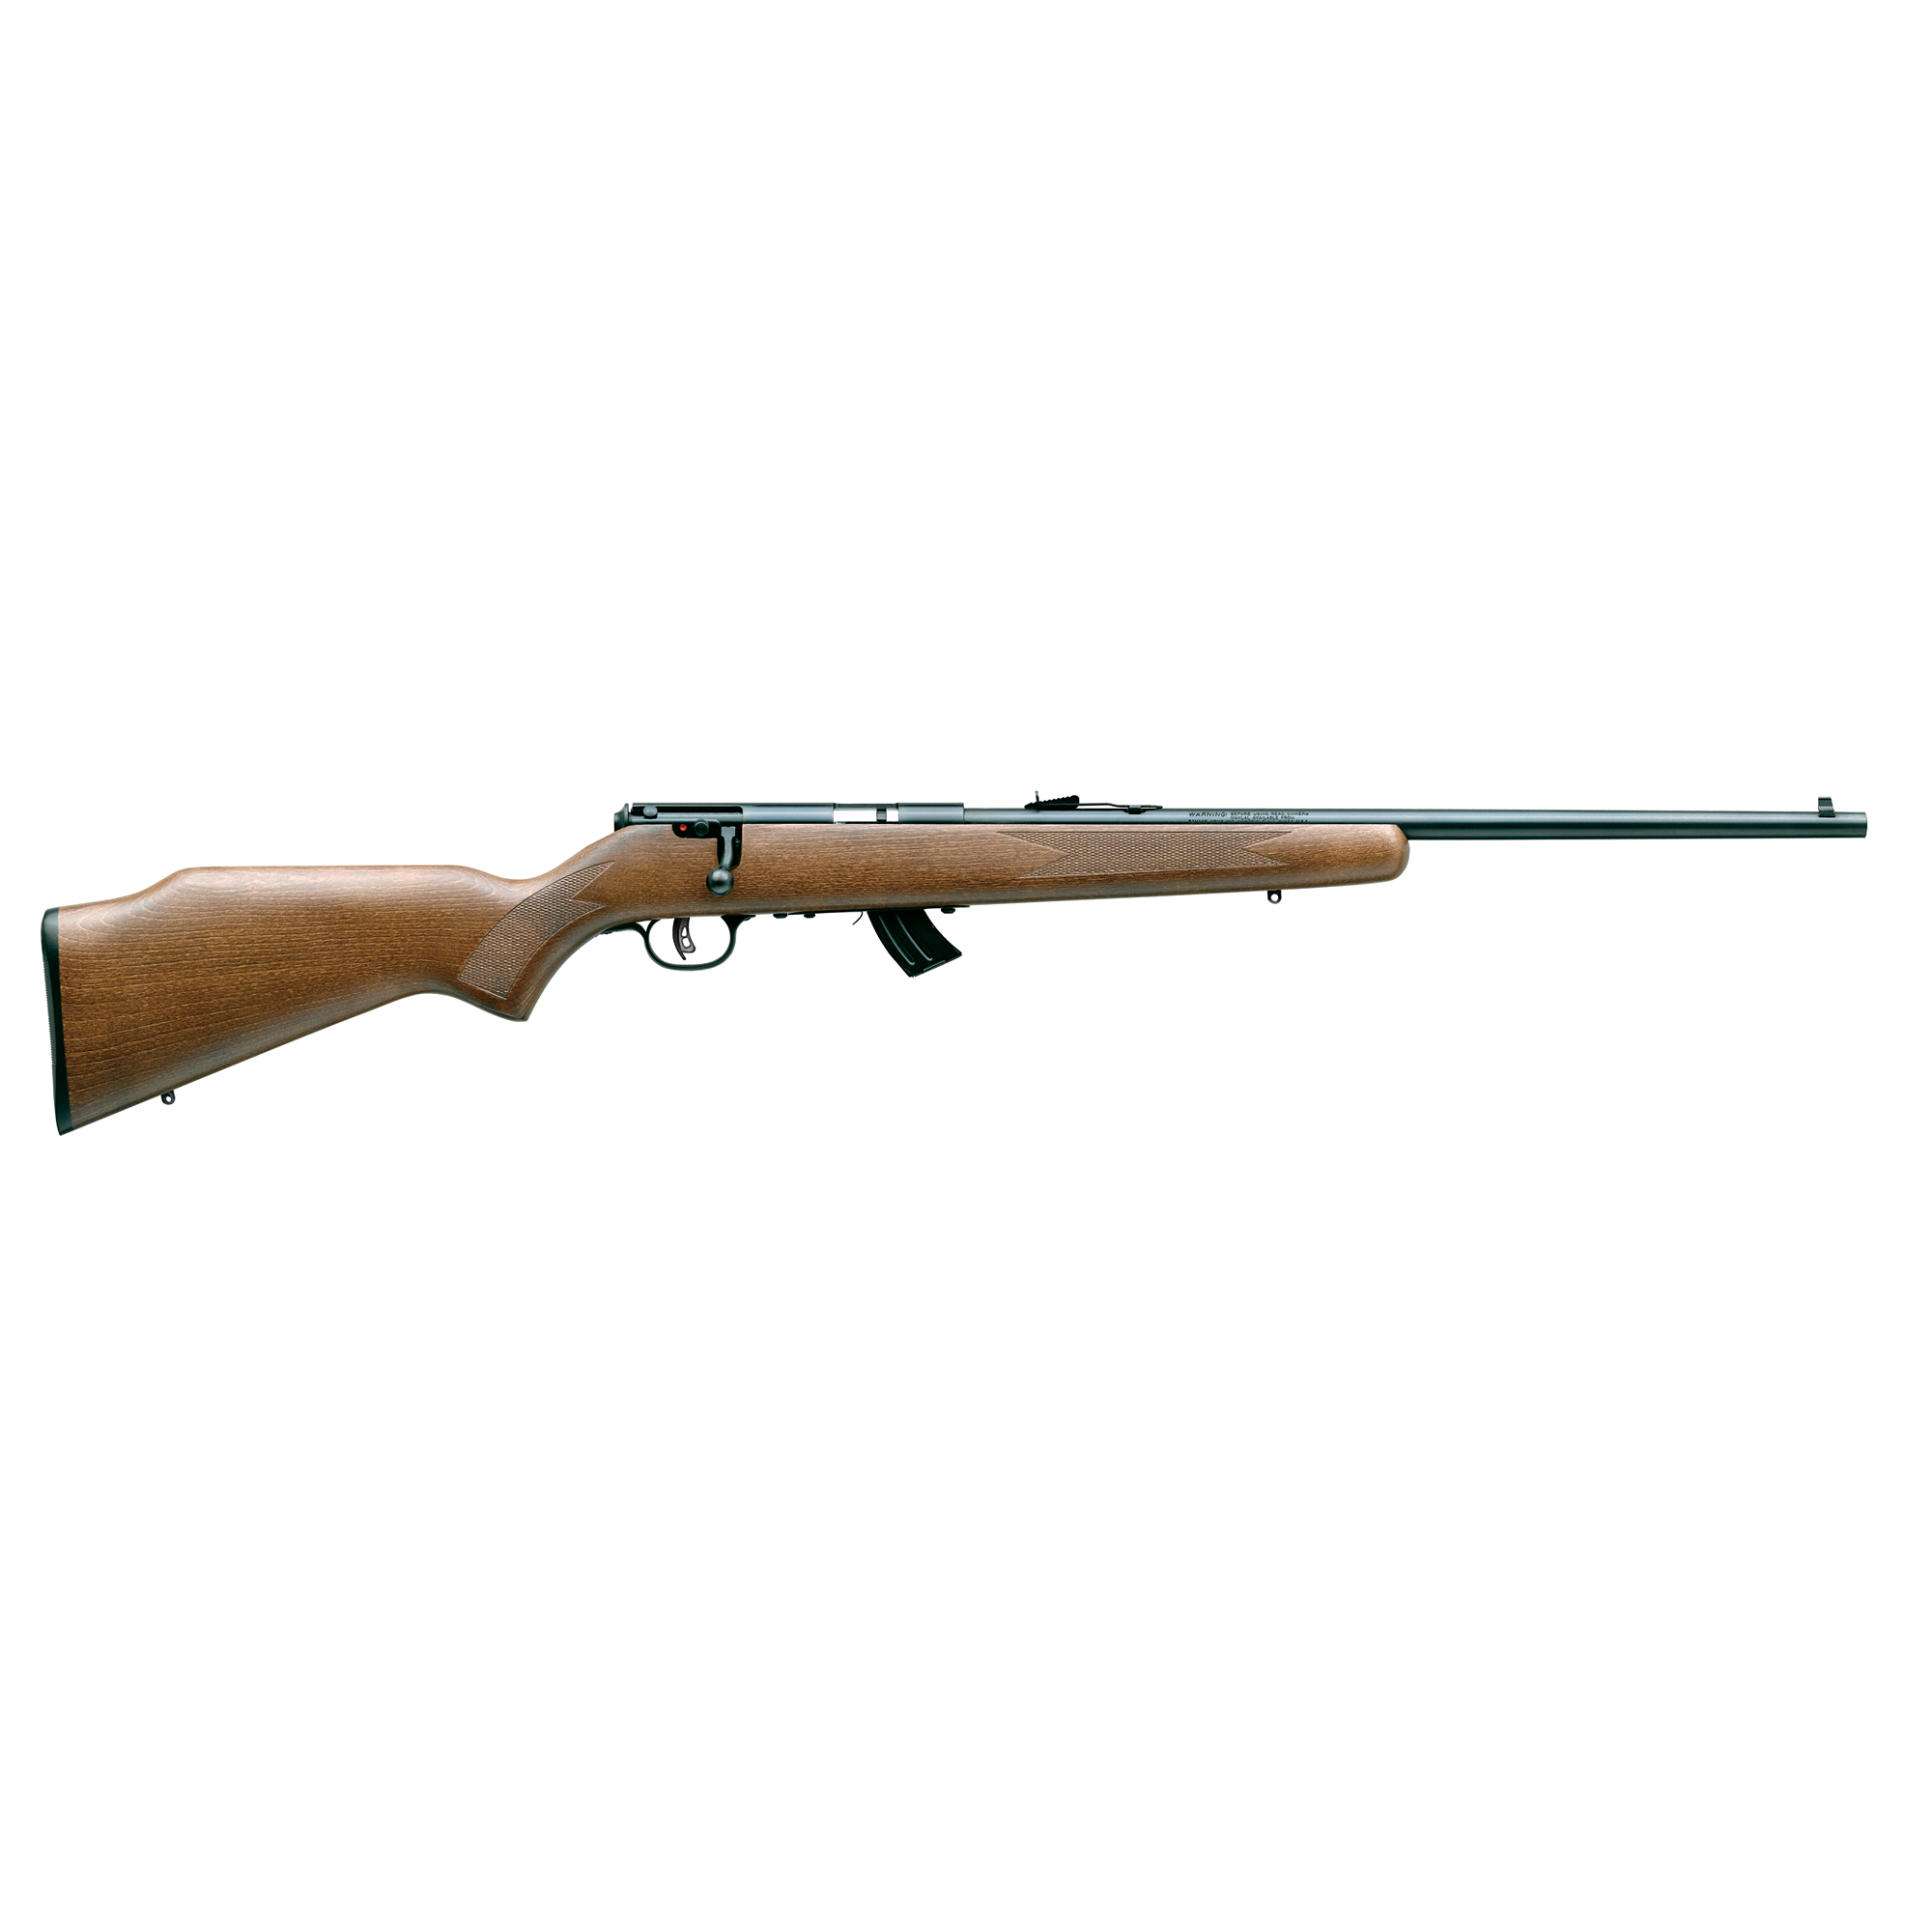 SAVAGE ARMS MKII-GY 22LR 19 10RD CMPT WOOD